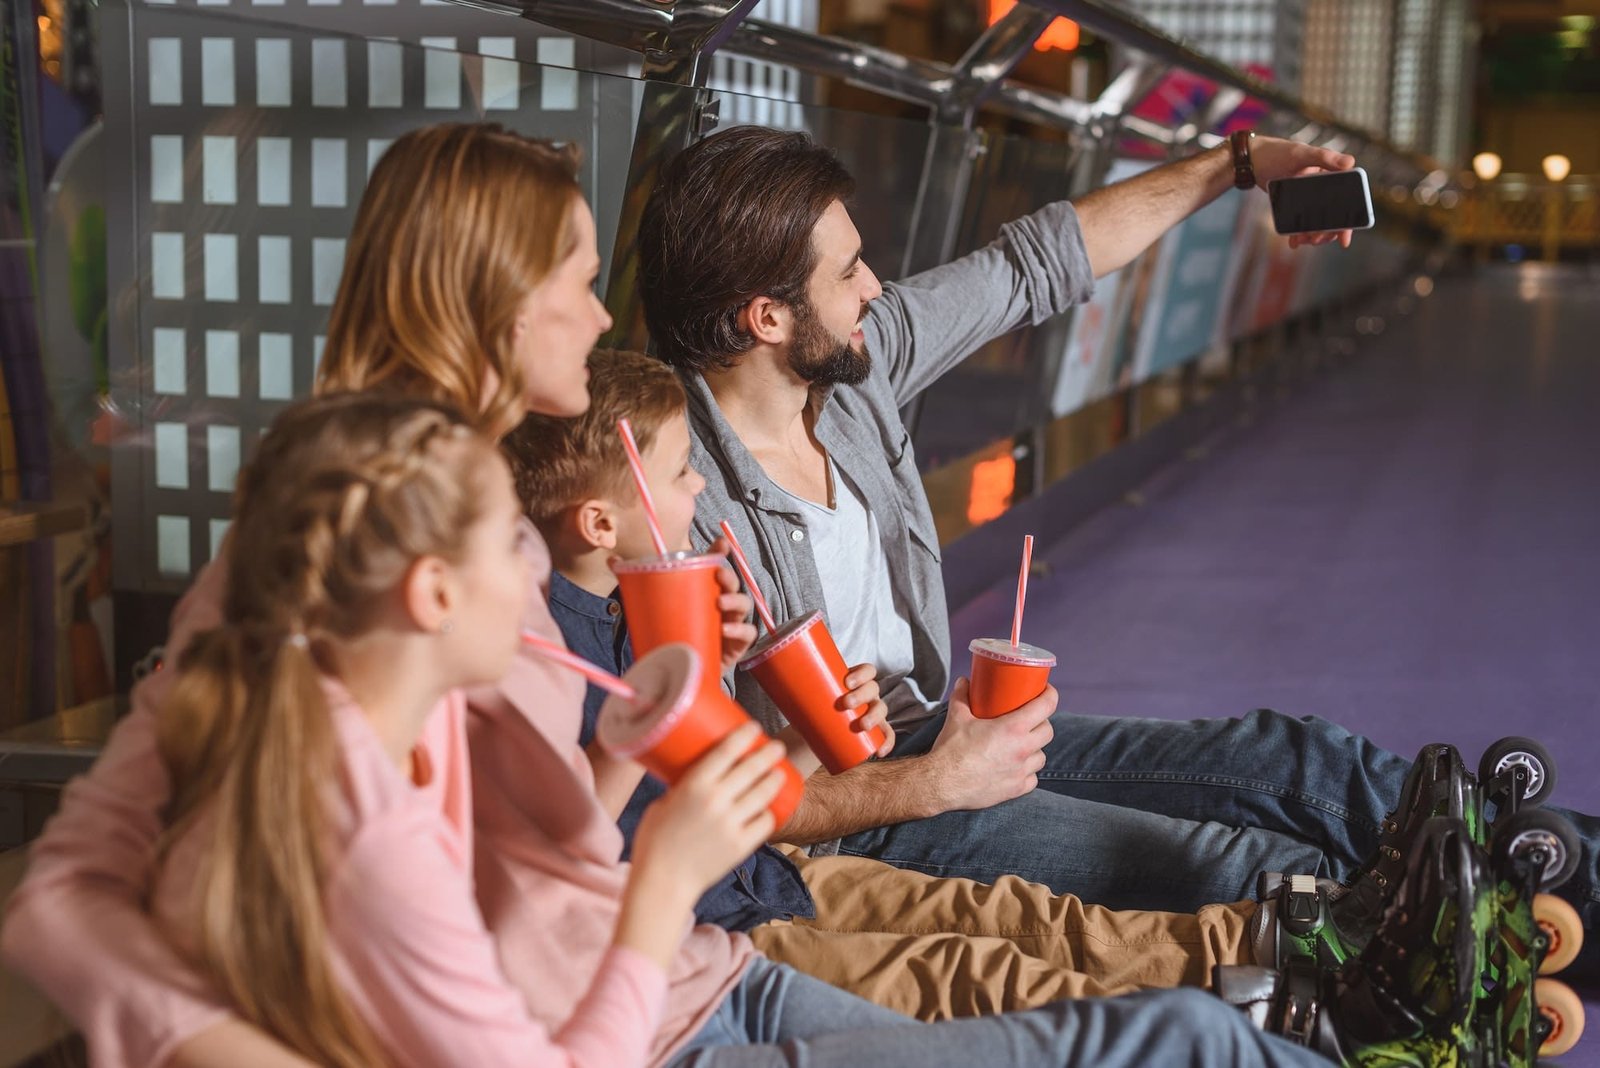 side view of family with drinks taking selfie while resting after skating on roller rink